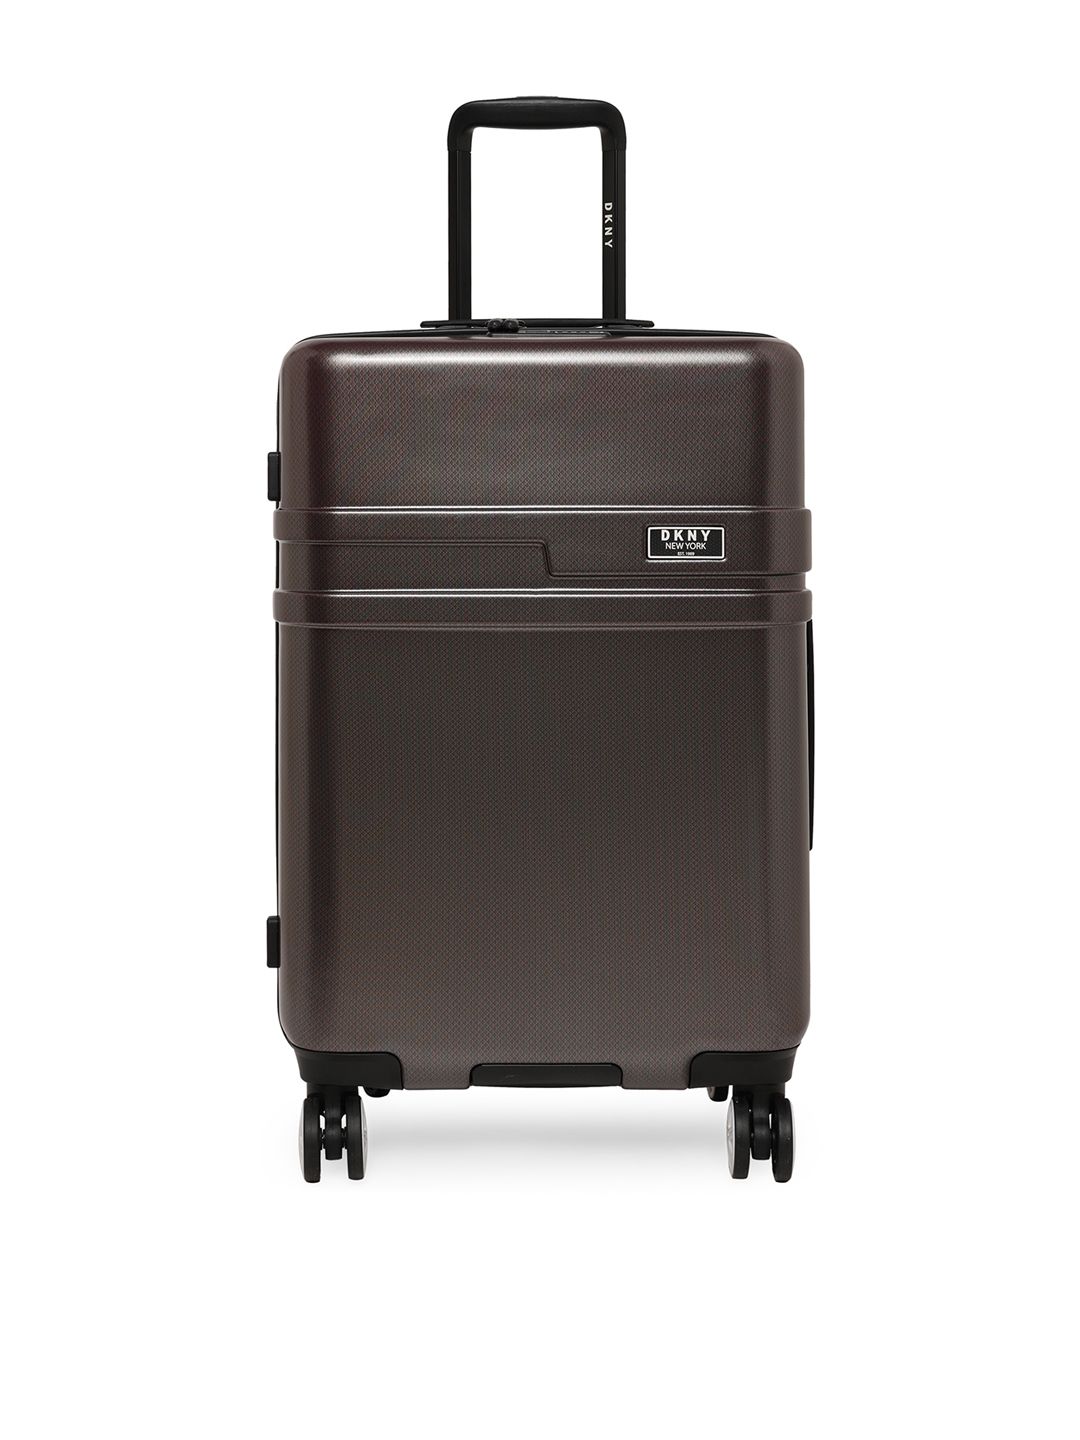 DKNY Brown Textured DASH Hard-Sided Medium Trolley Suitcase Price in India